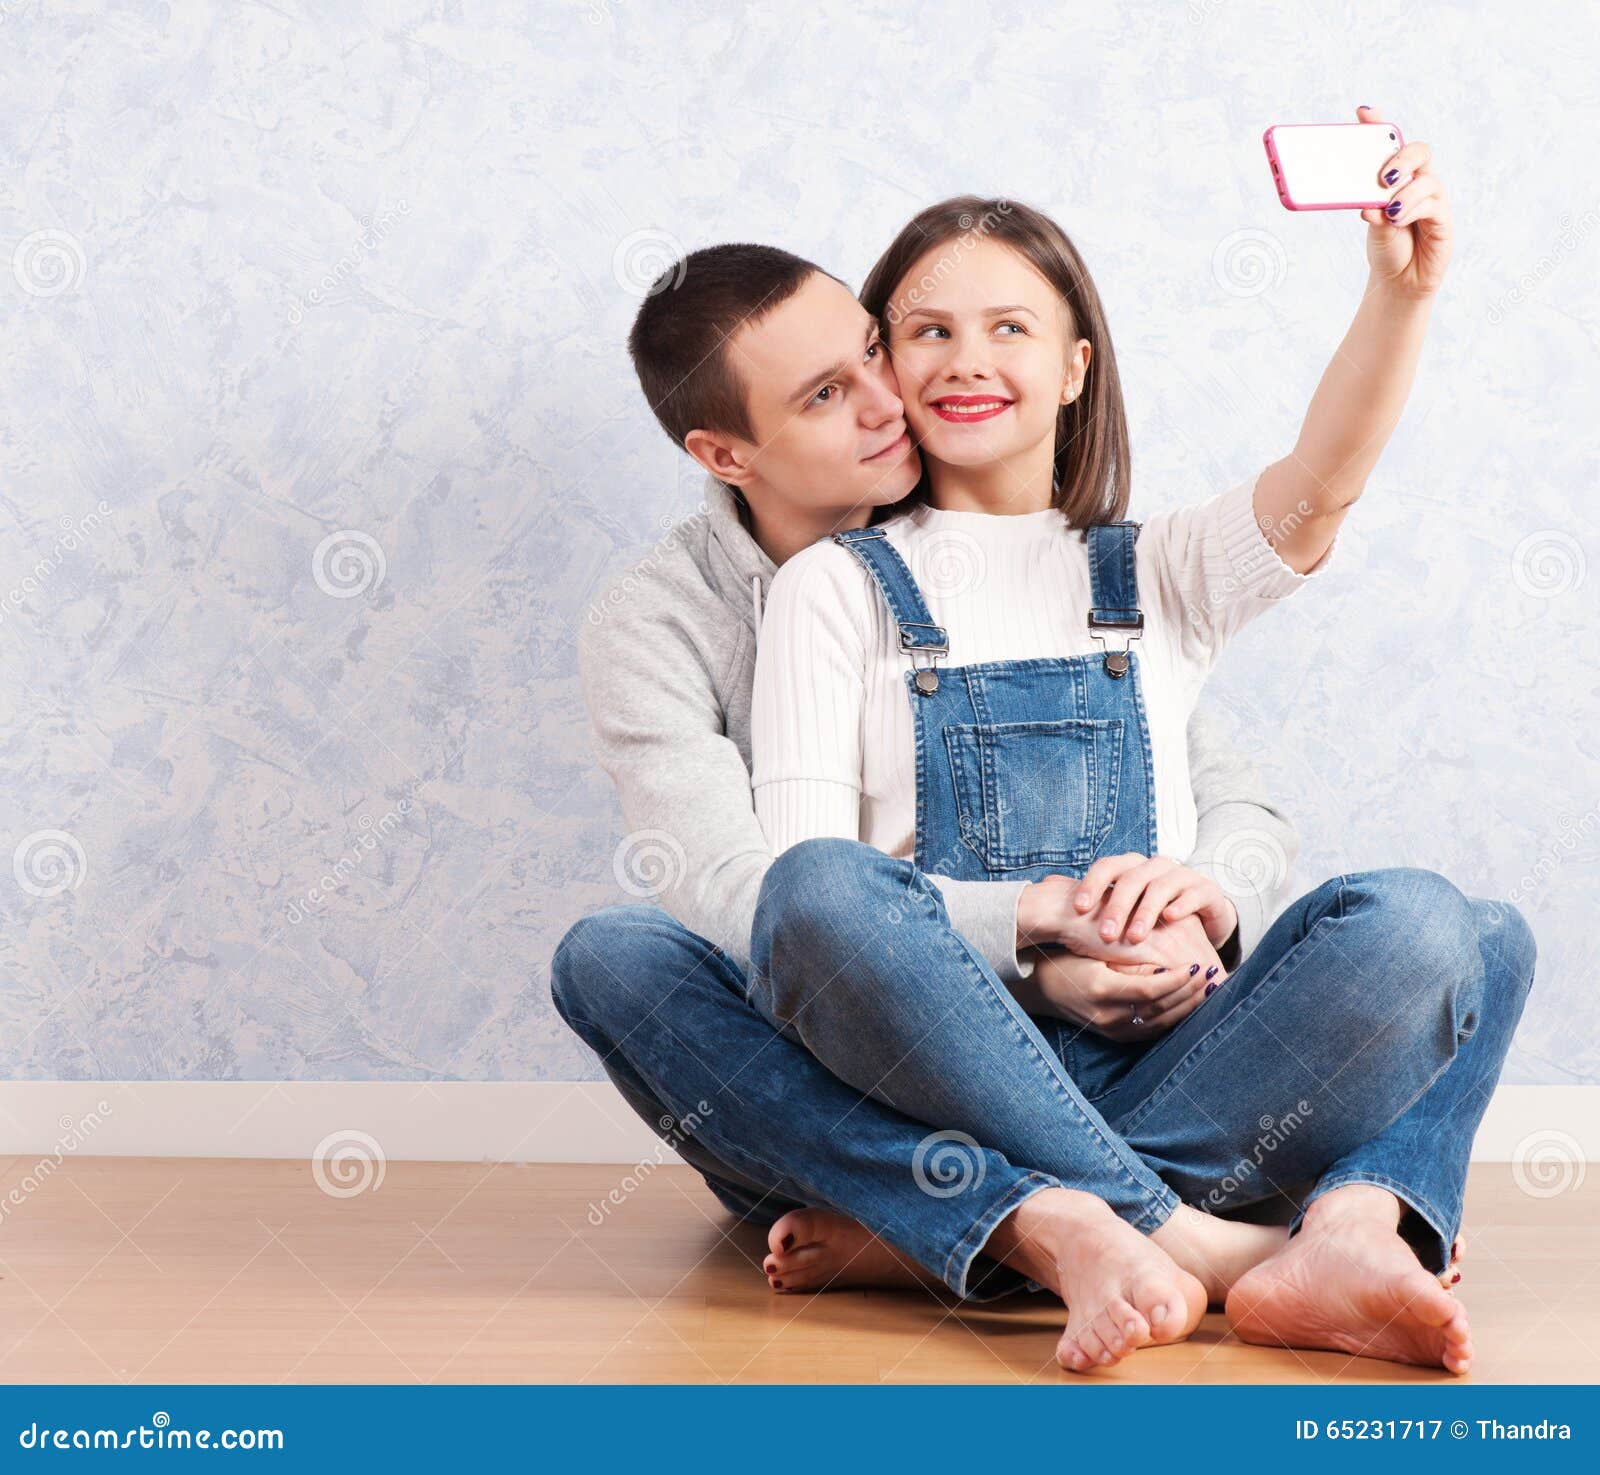 capturing happy moments together. happy young loving couple making selfie